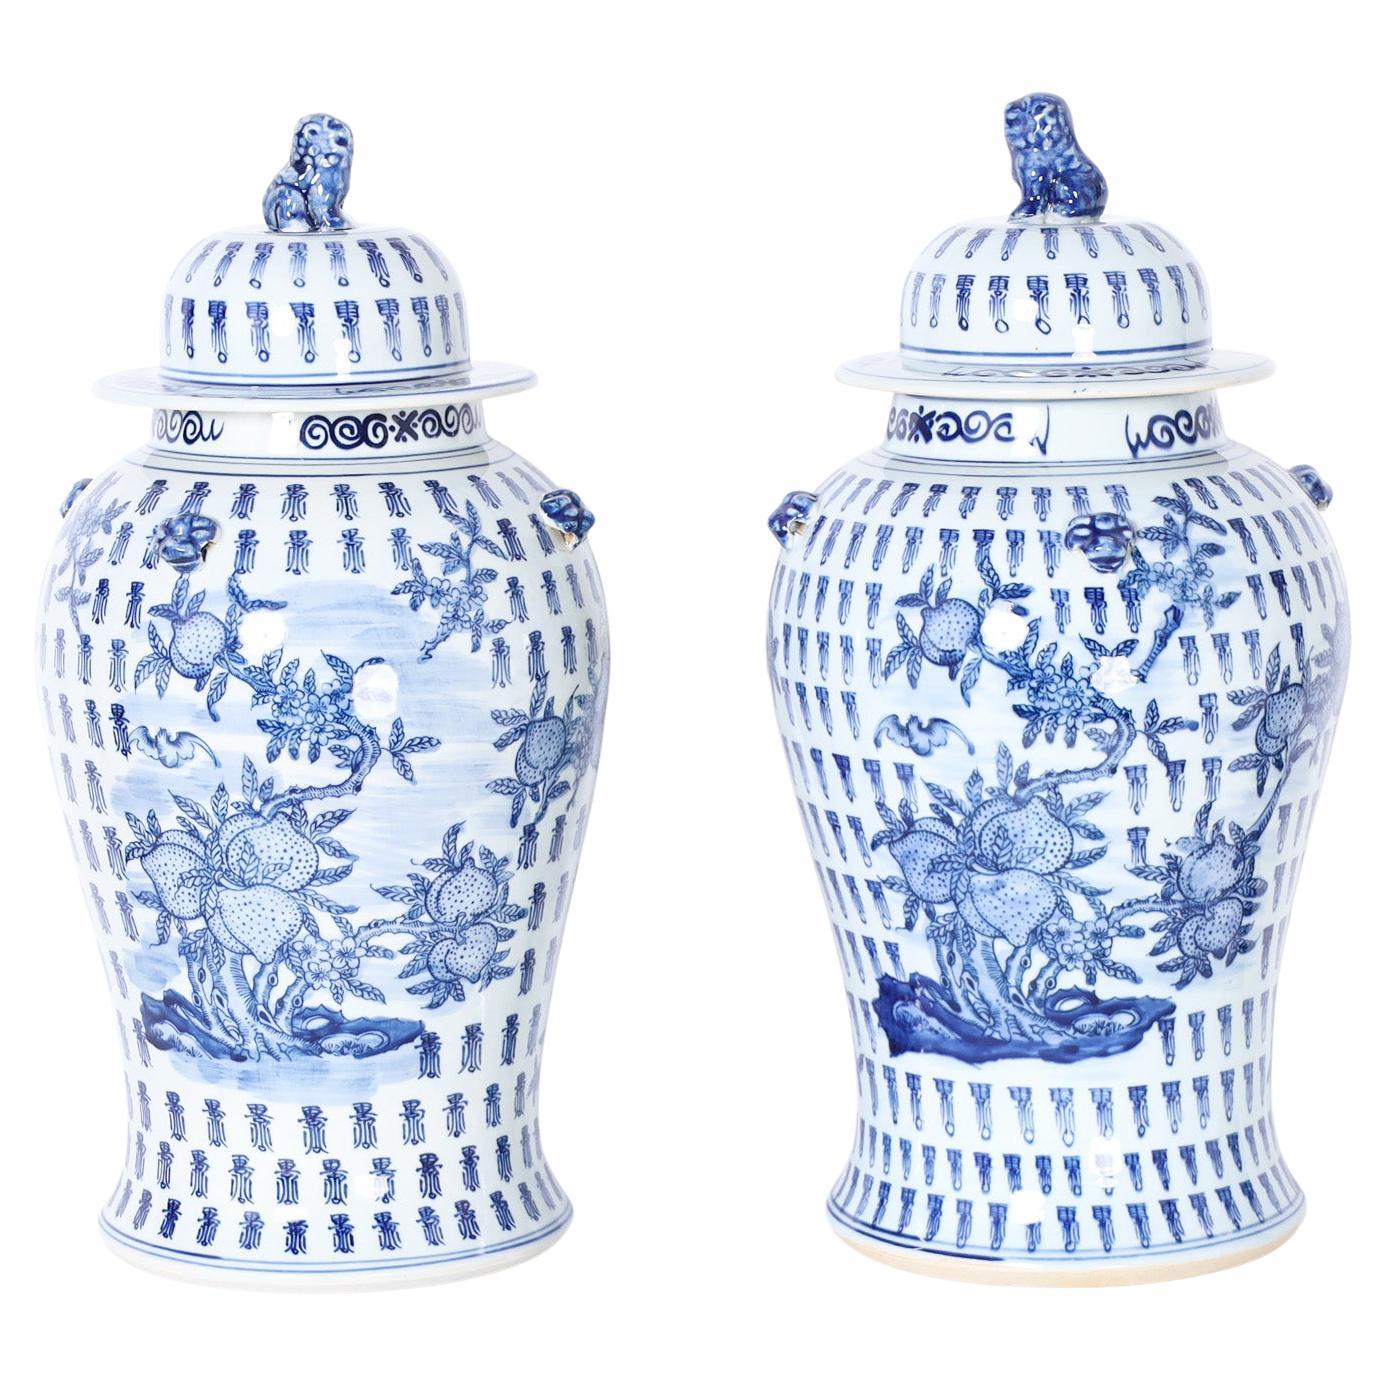 Pair of Large Blue and White Porcelain Lidded Urns or Jars For Sale